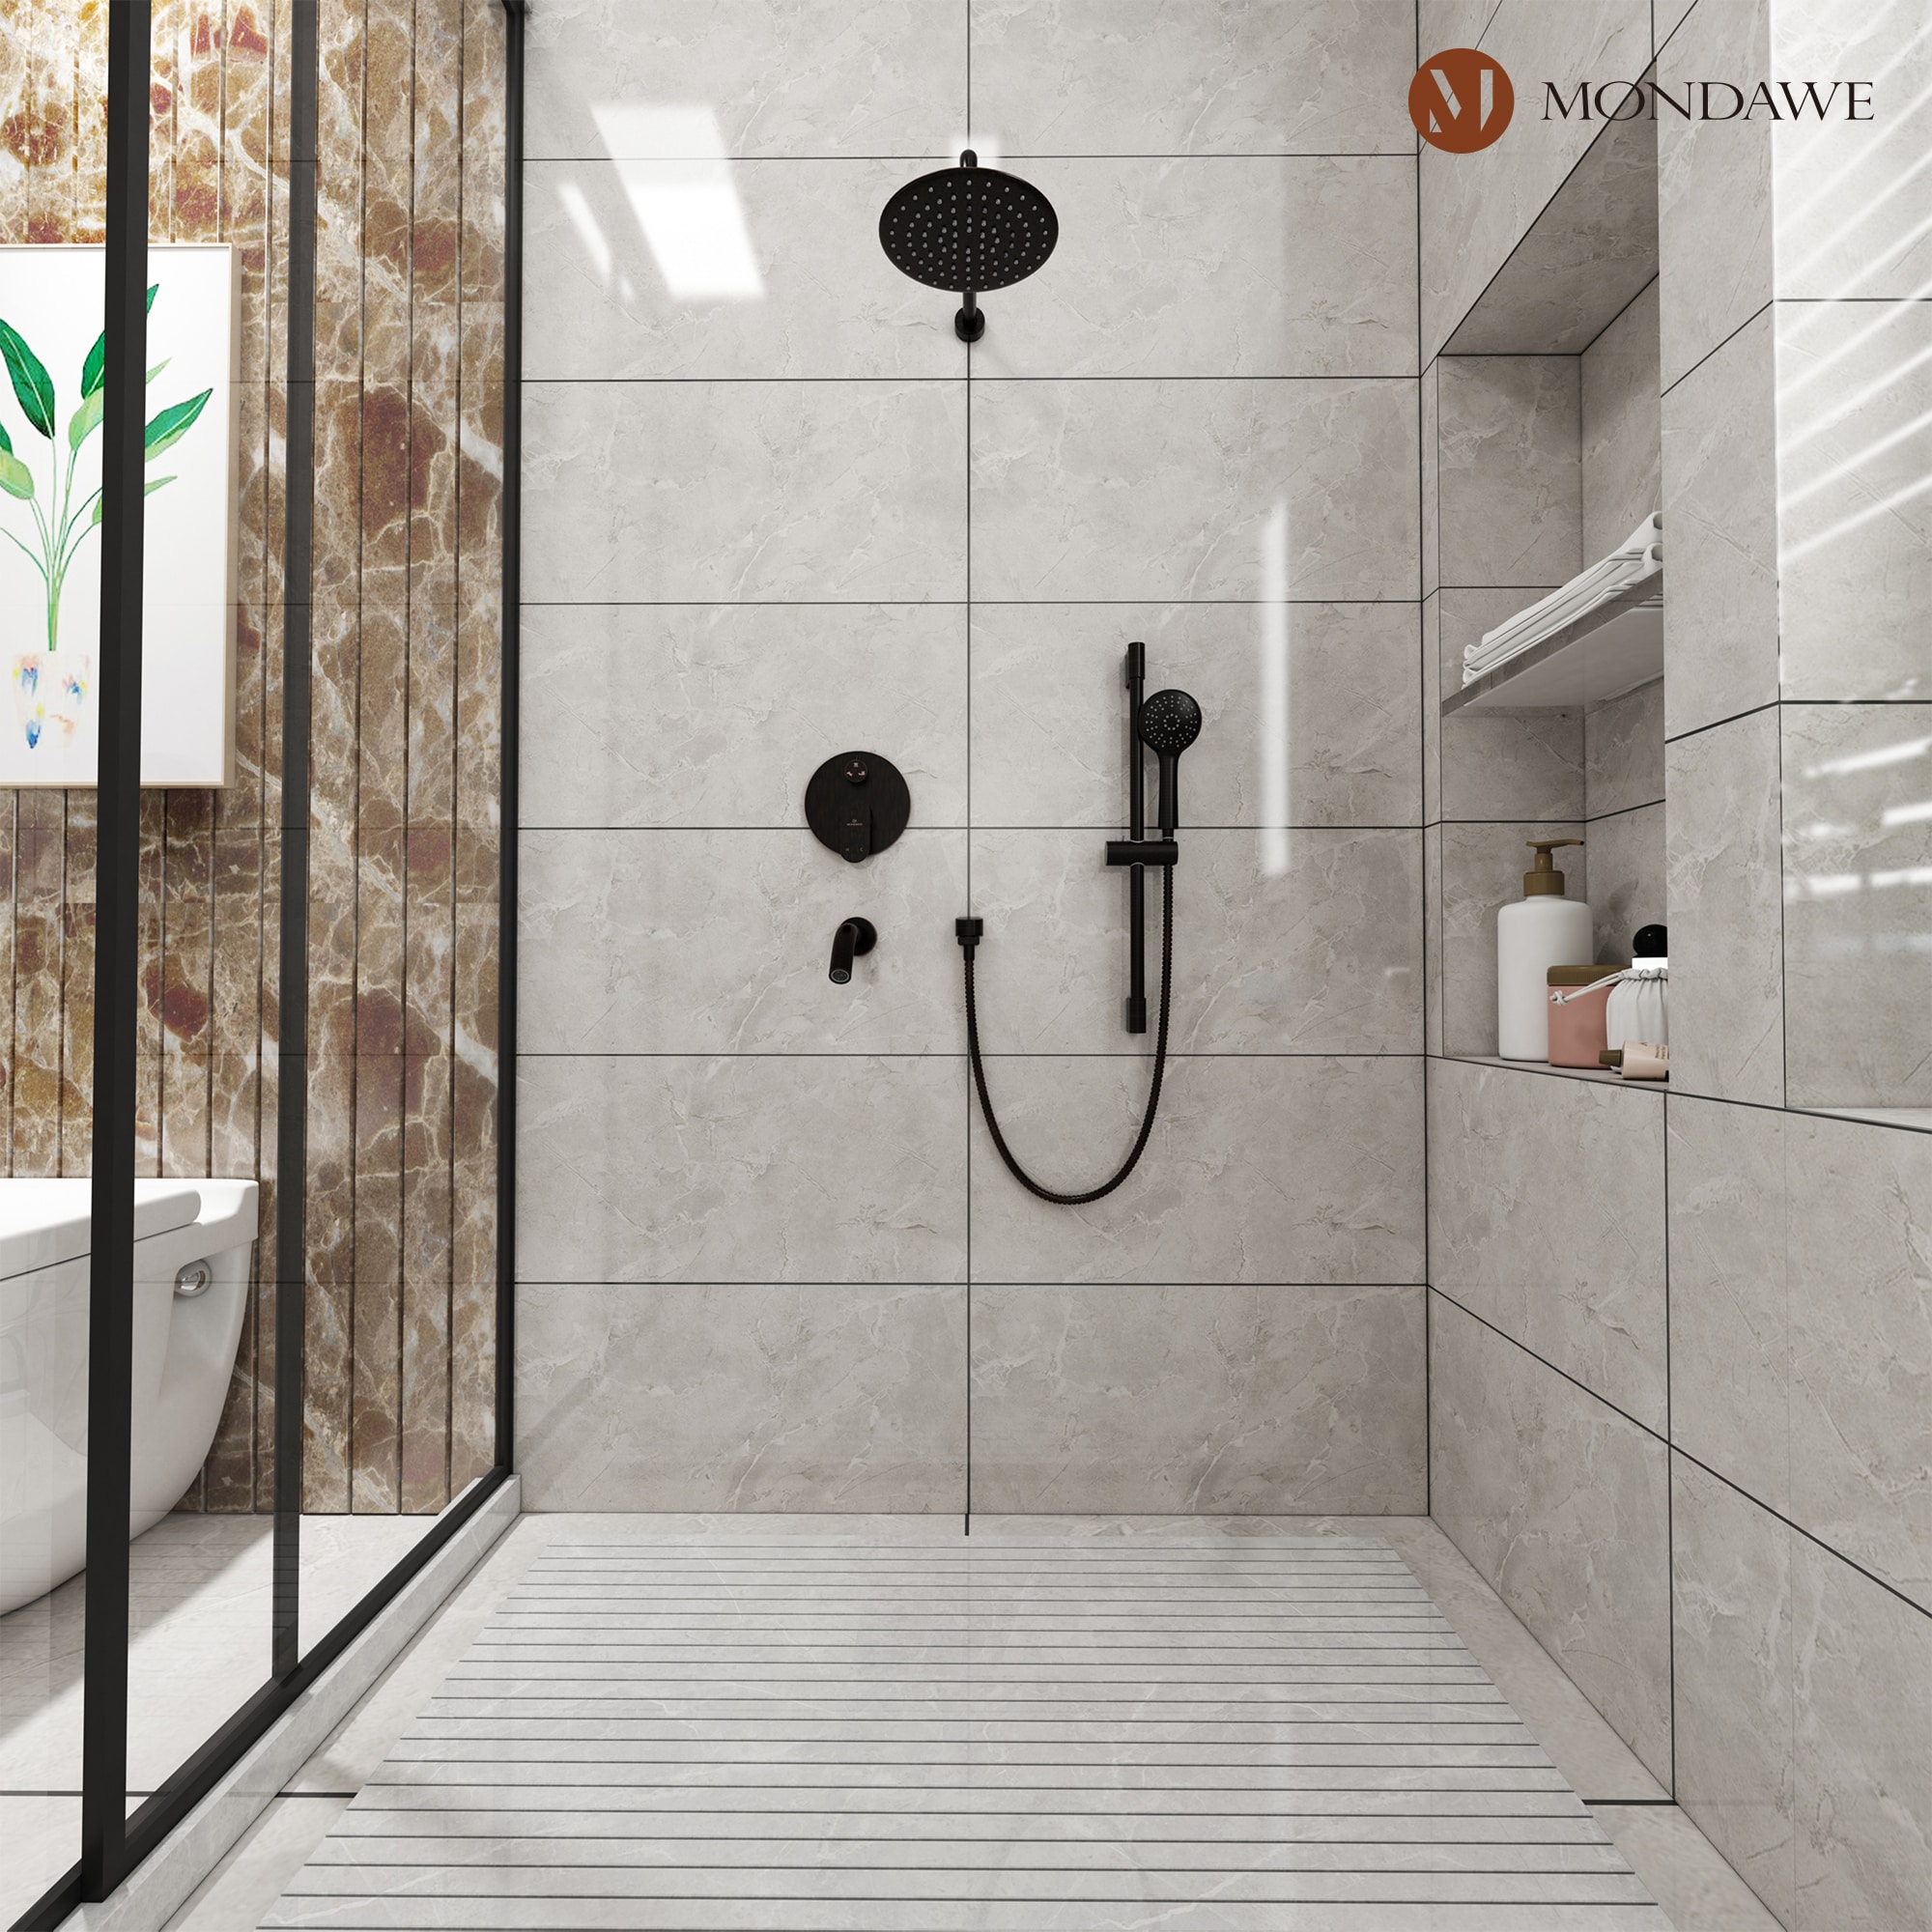 Mondawe Oil-Rubbed Bronze Built-In Shower Faucet System with 3-way Diverter  Pressure-balanced Valve Included